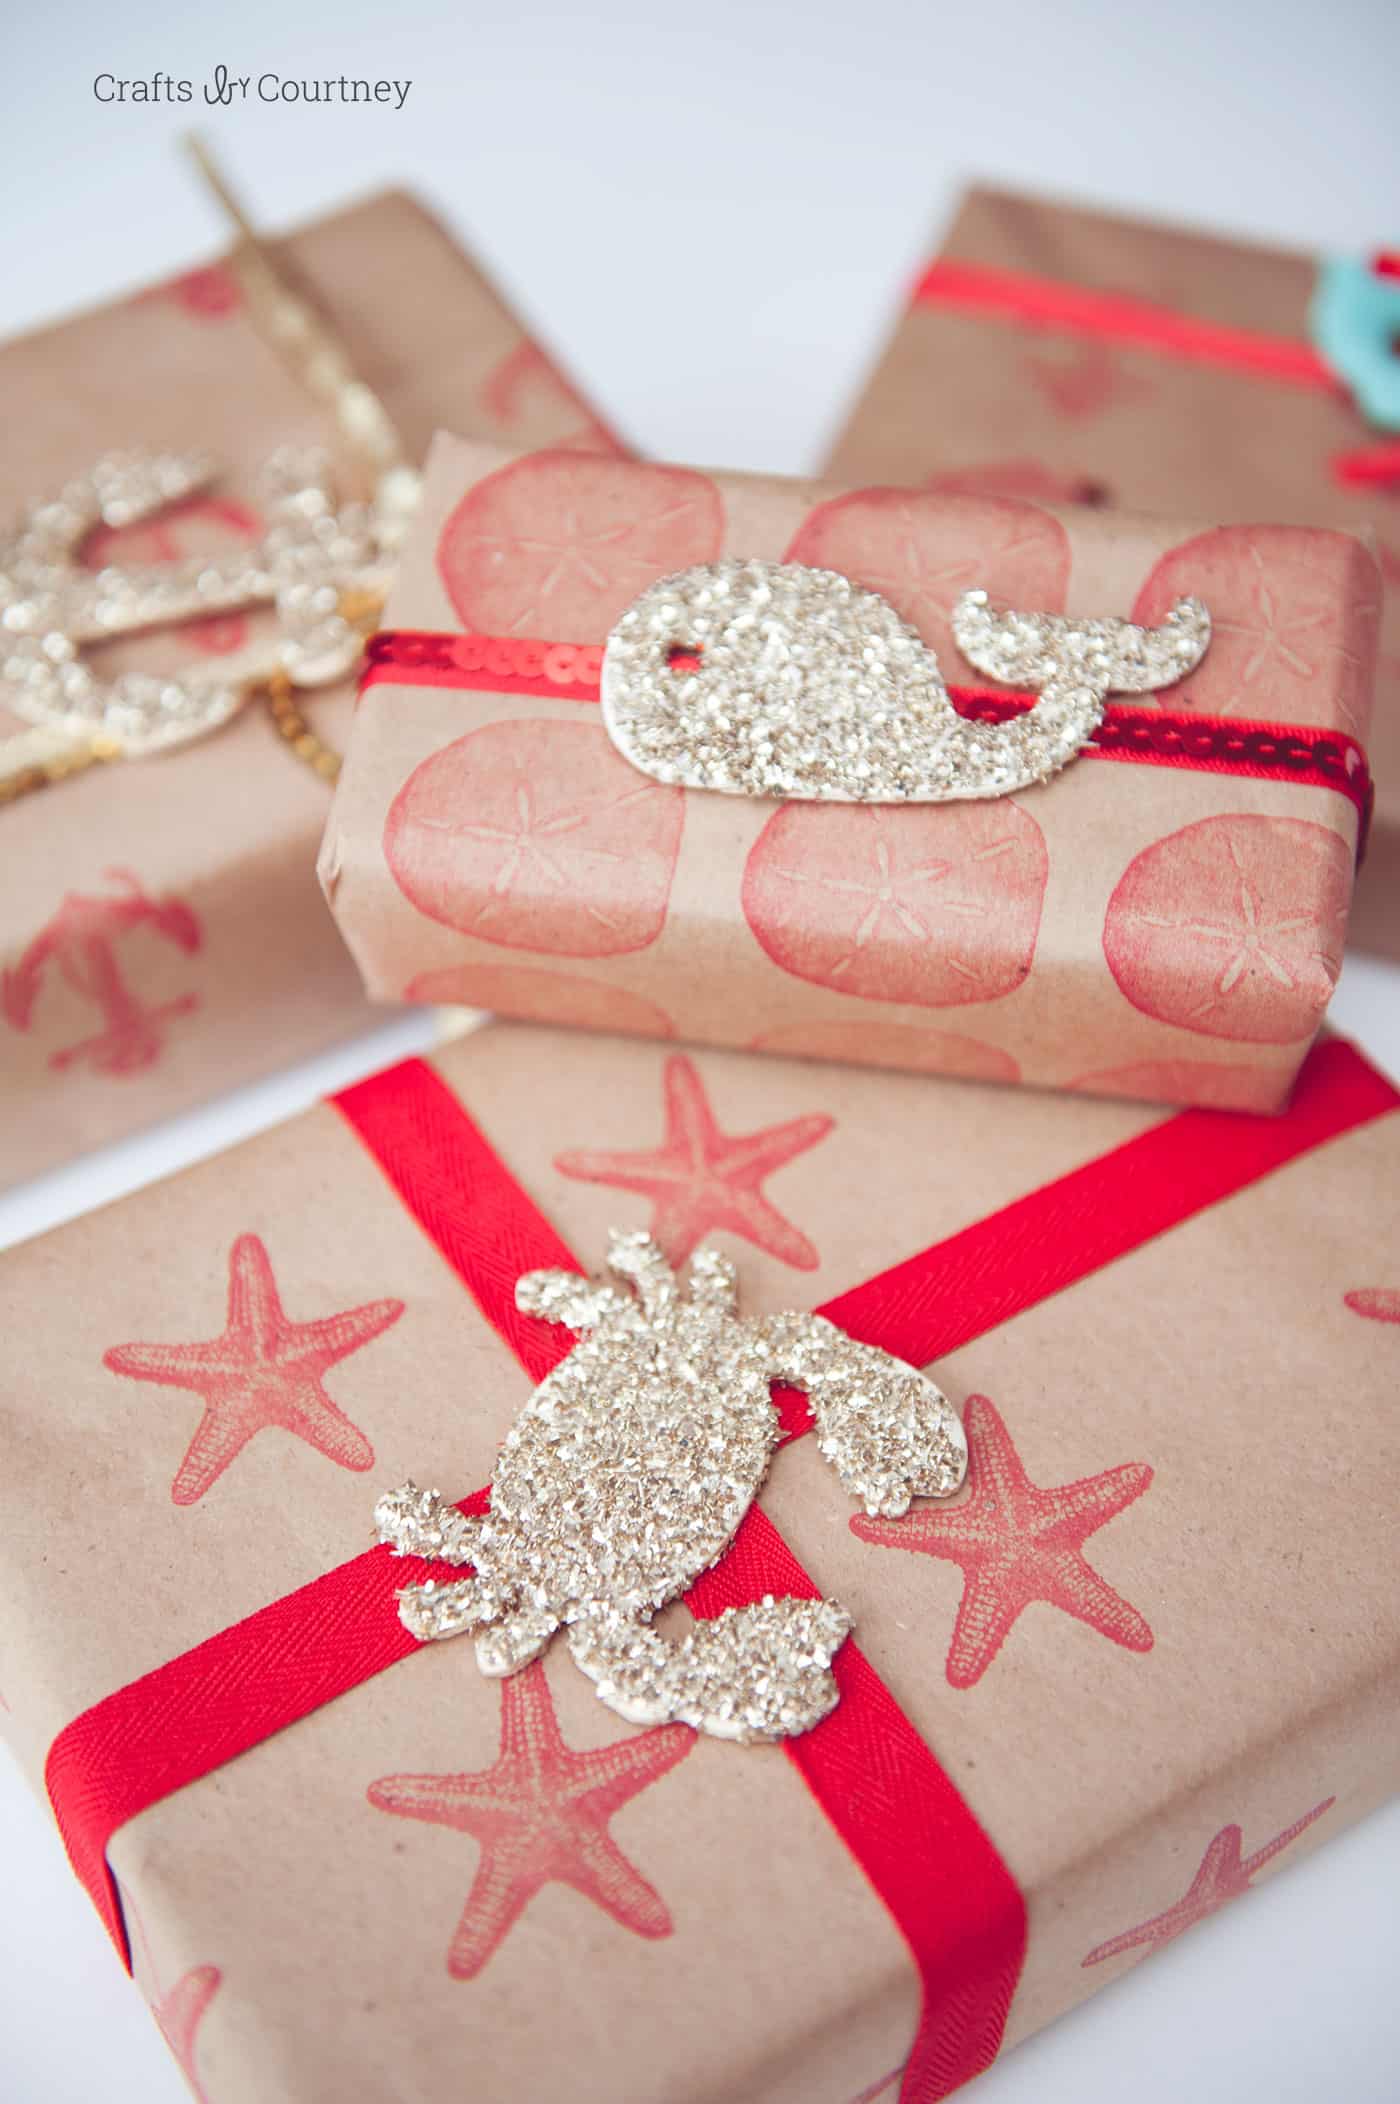 How to make your own wrapping paper